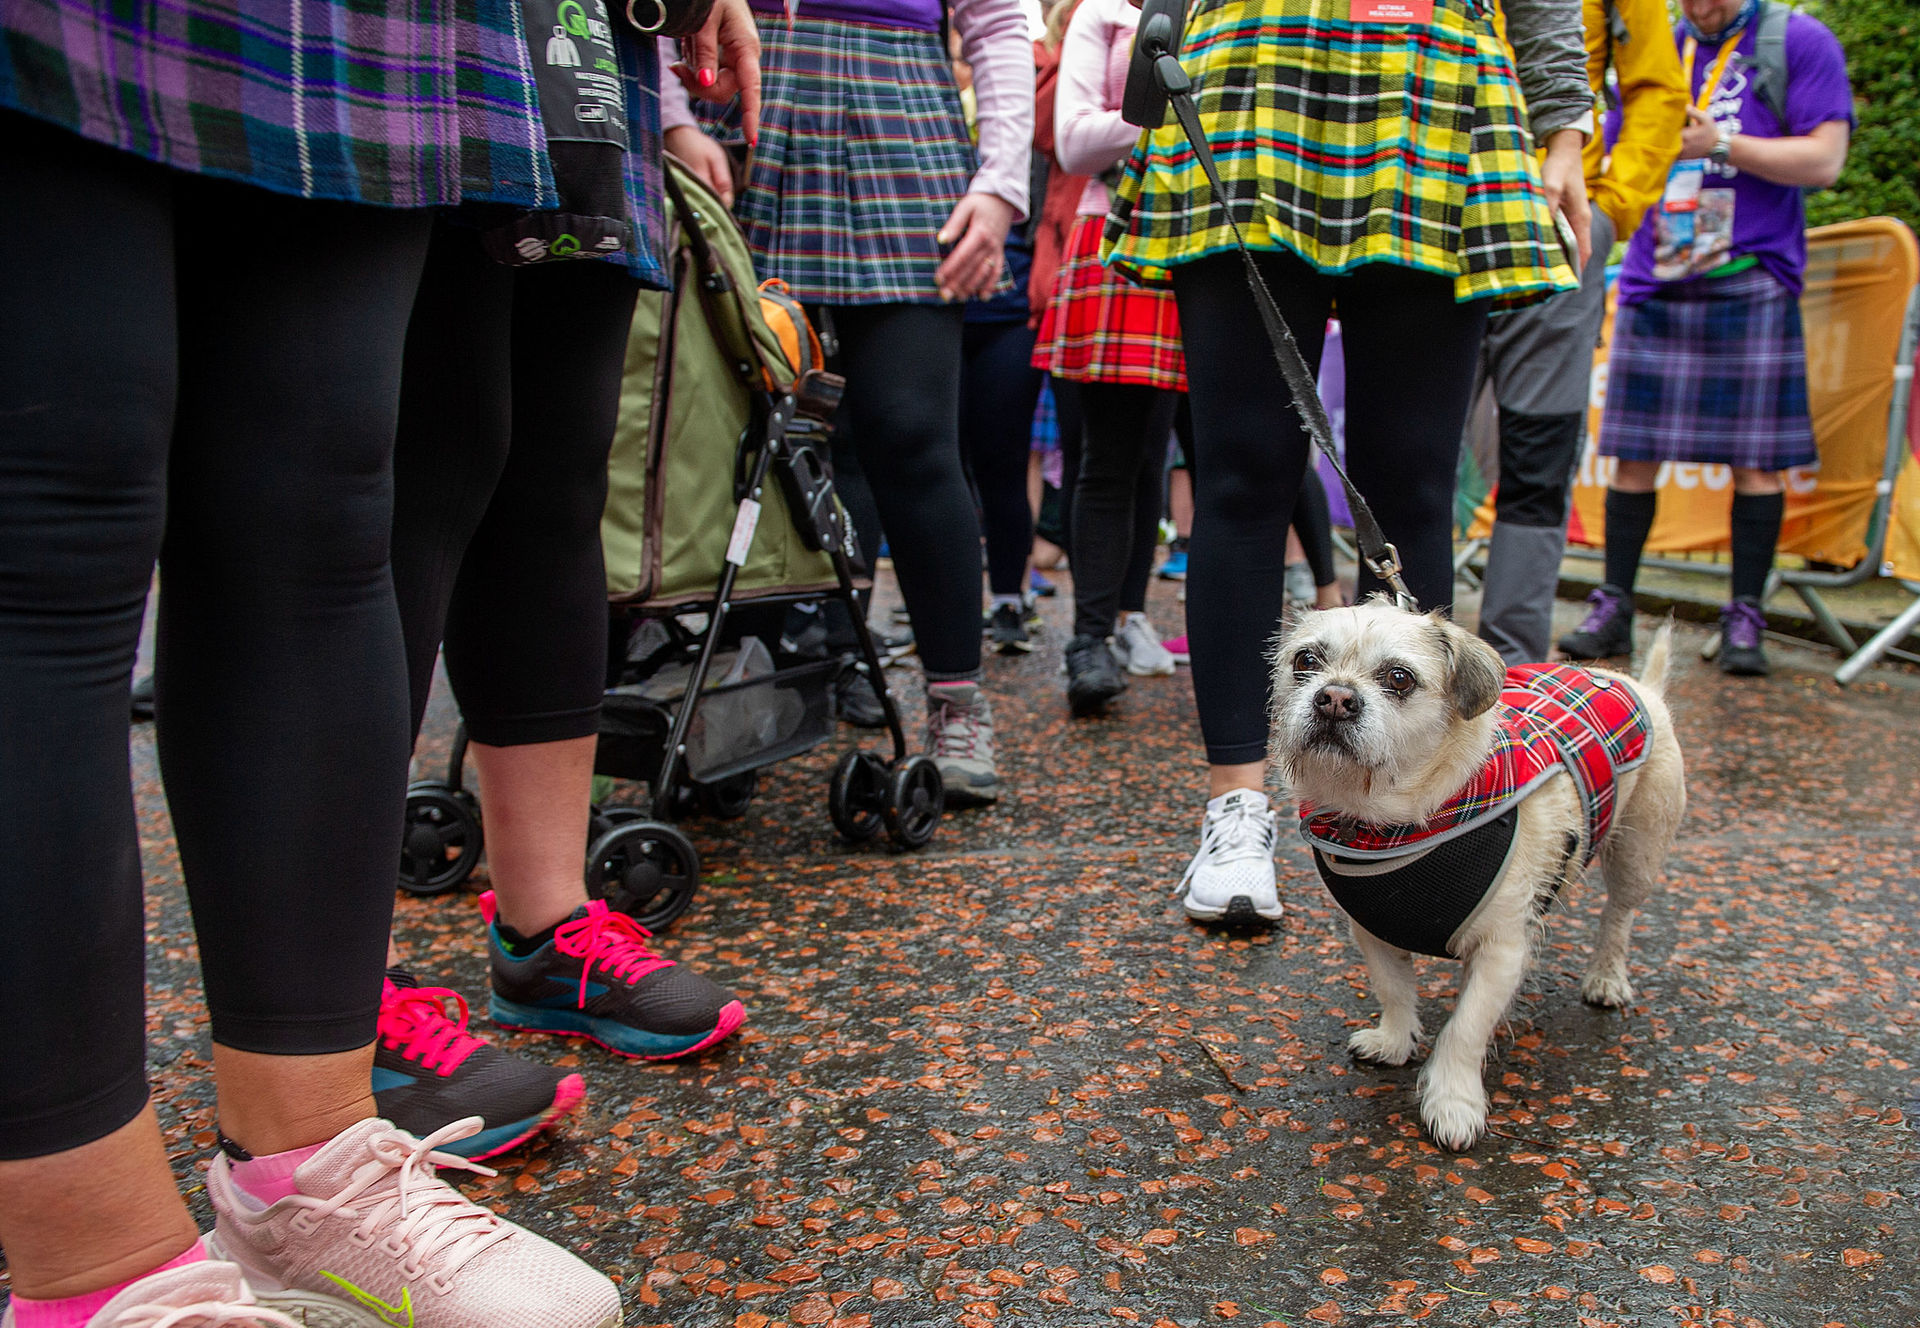  Some walkers were joined by their four-legged friends.